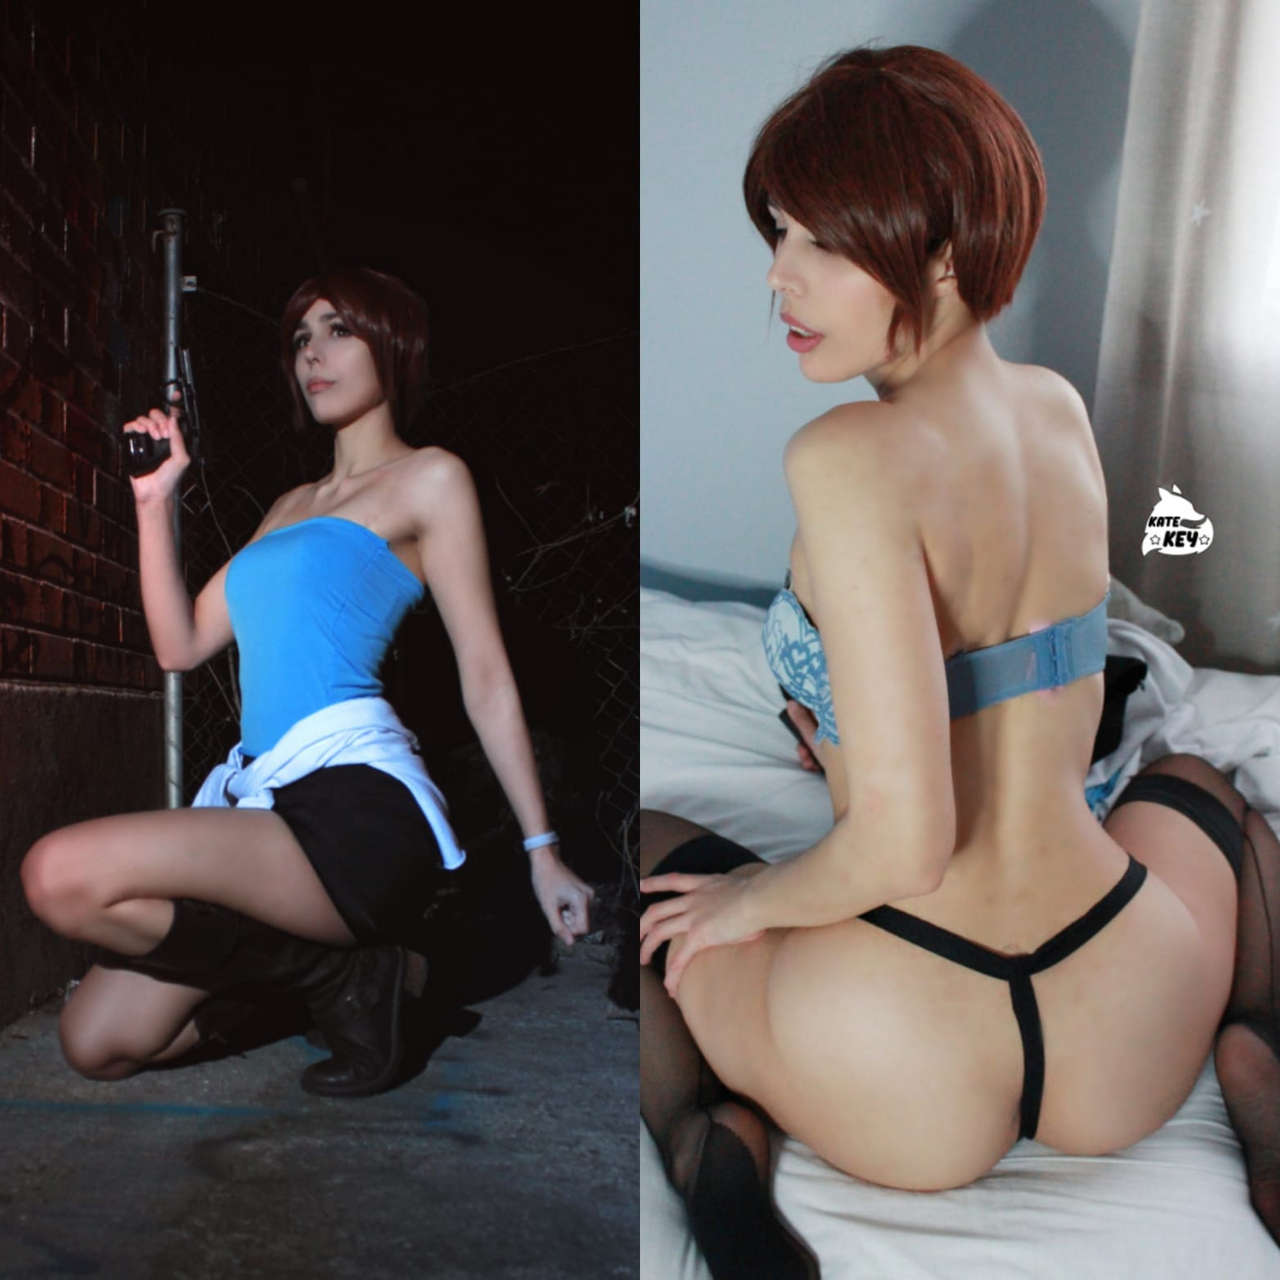 On Off Jill Valentine From Re3 By Kate Key Sel